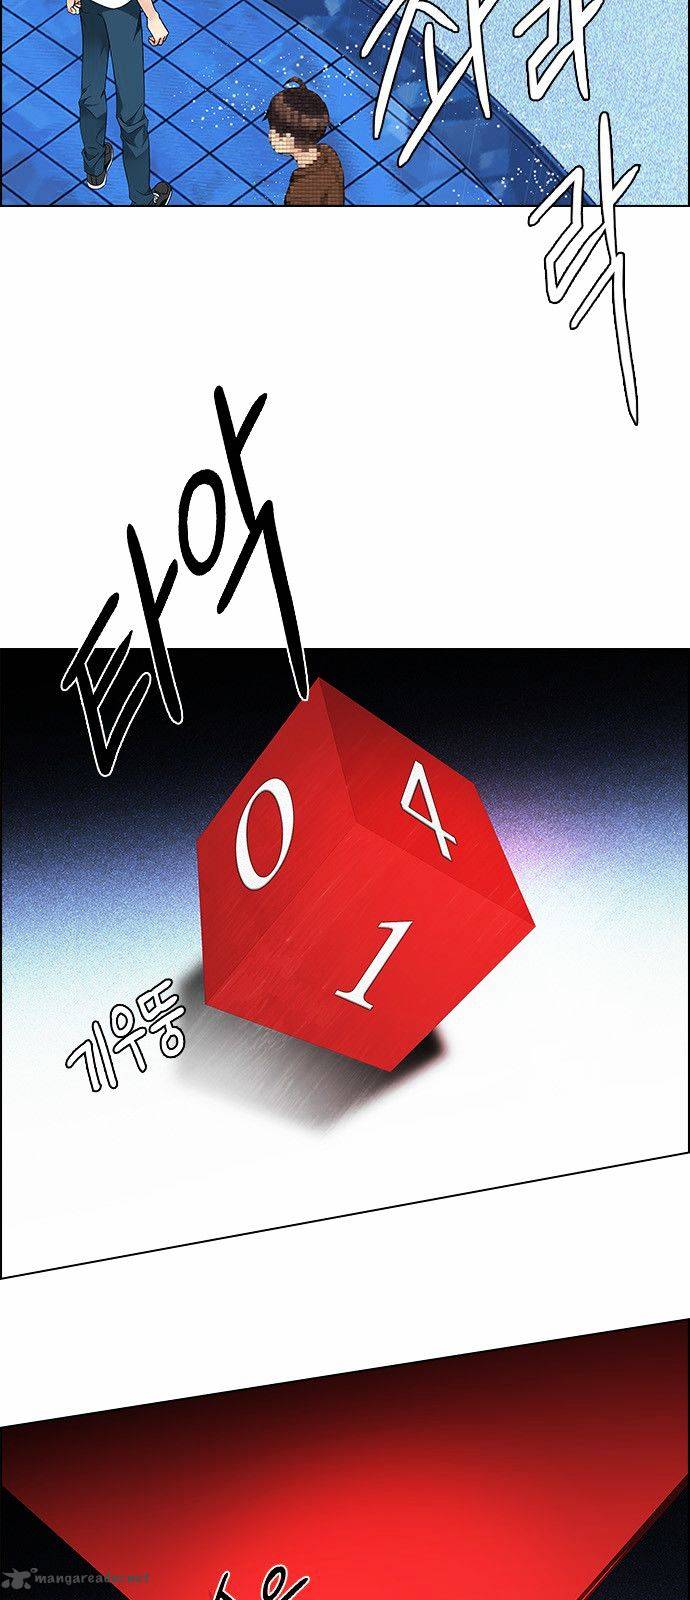 Dice The Cube That Changes Everything 164 29